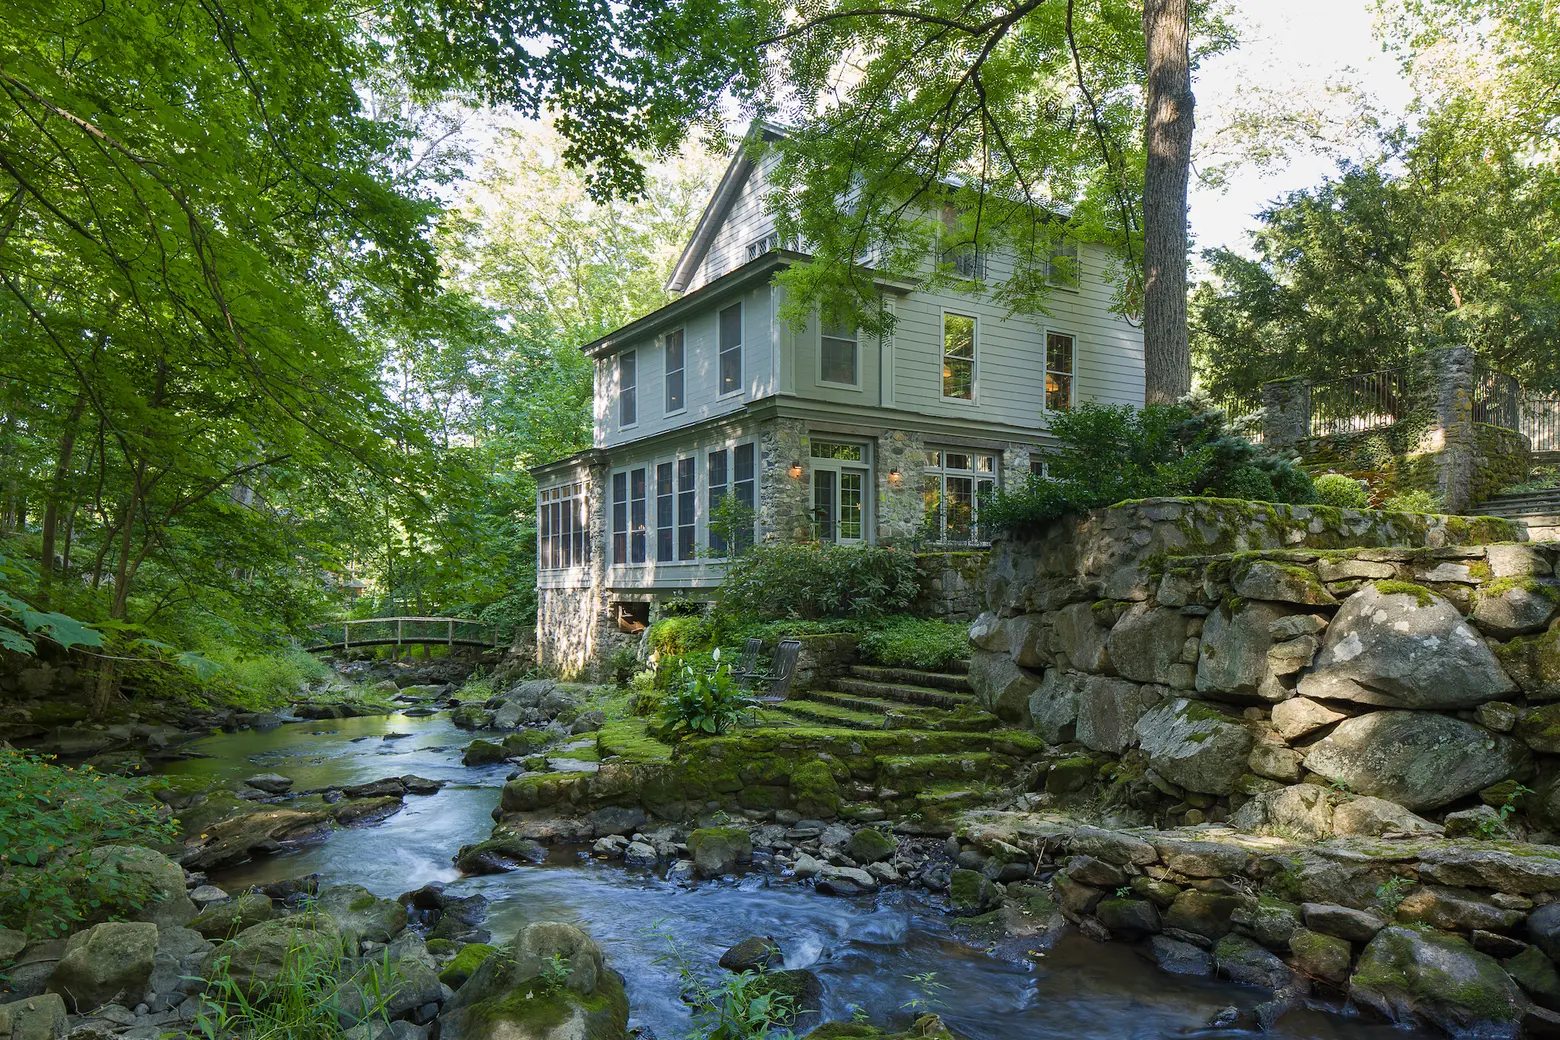 For $2.8M, this 1840s upstate millhouse has a private waterfall, terraced gardens, and a gorgeous pool